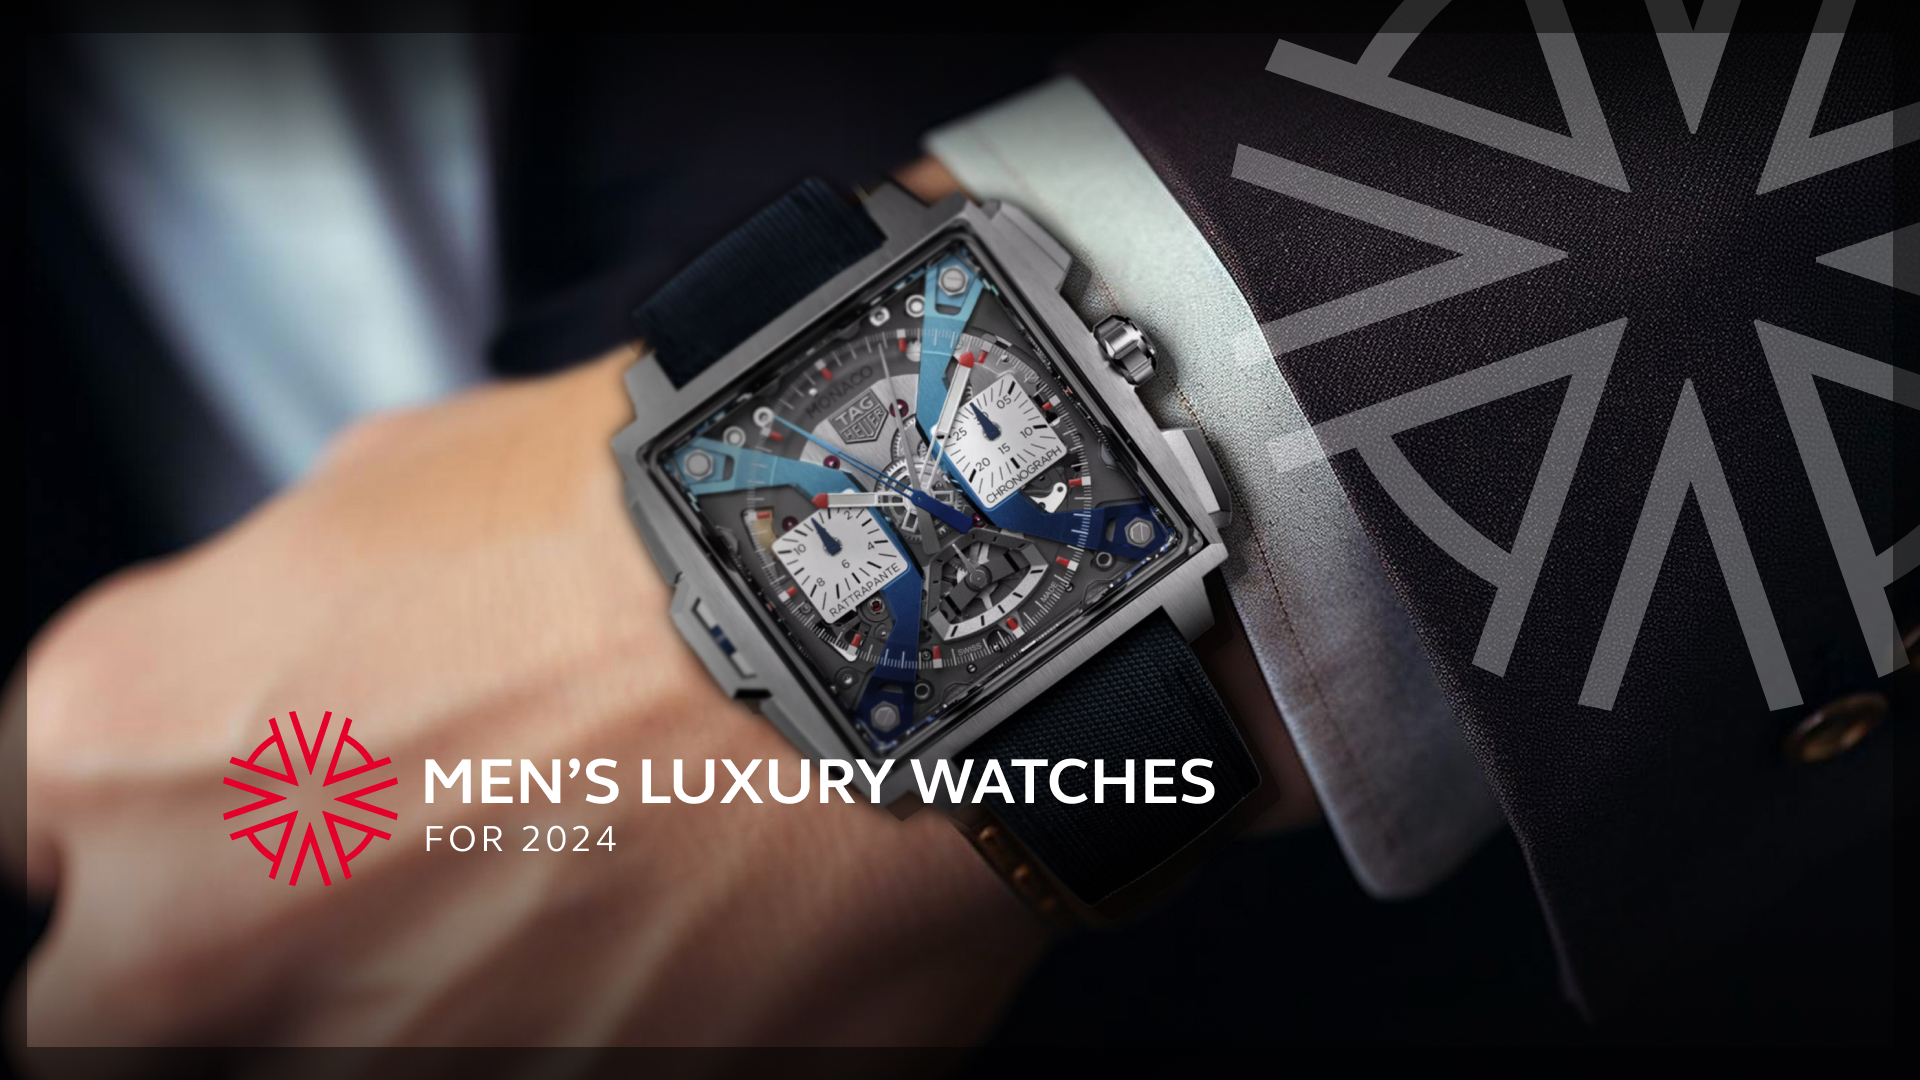 A man's wrist with the men's luxury watch brand Tag Heuer on it